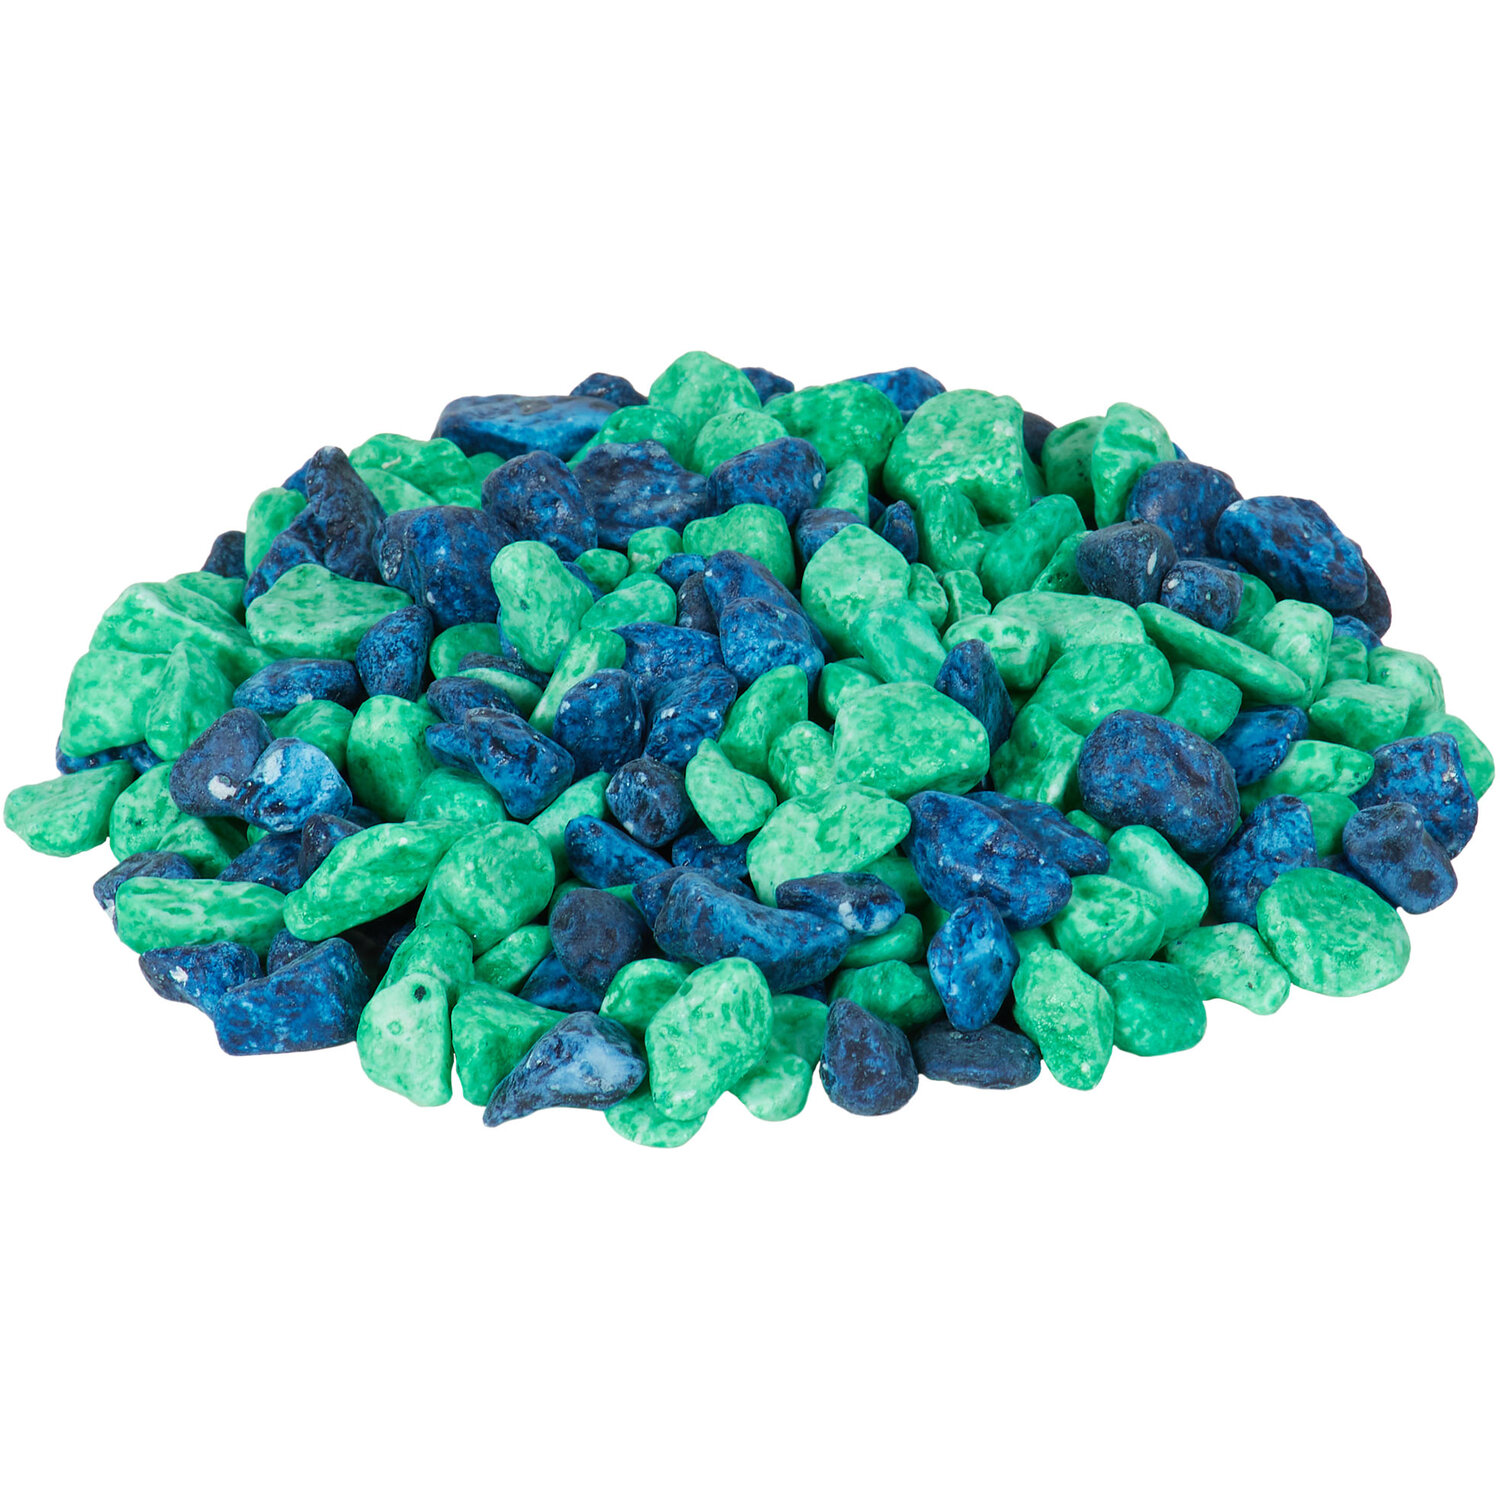 Fish Tank Gravel - Blue and Green Image 1